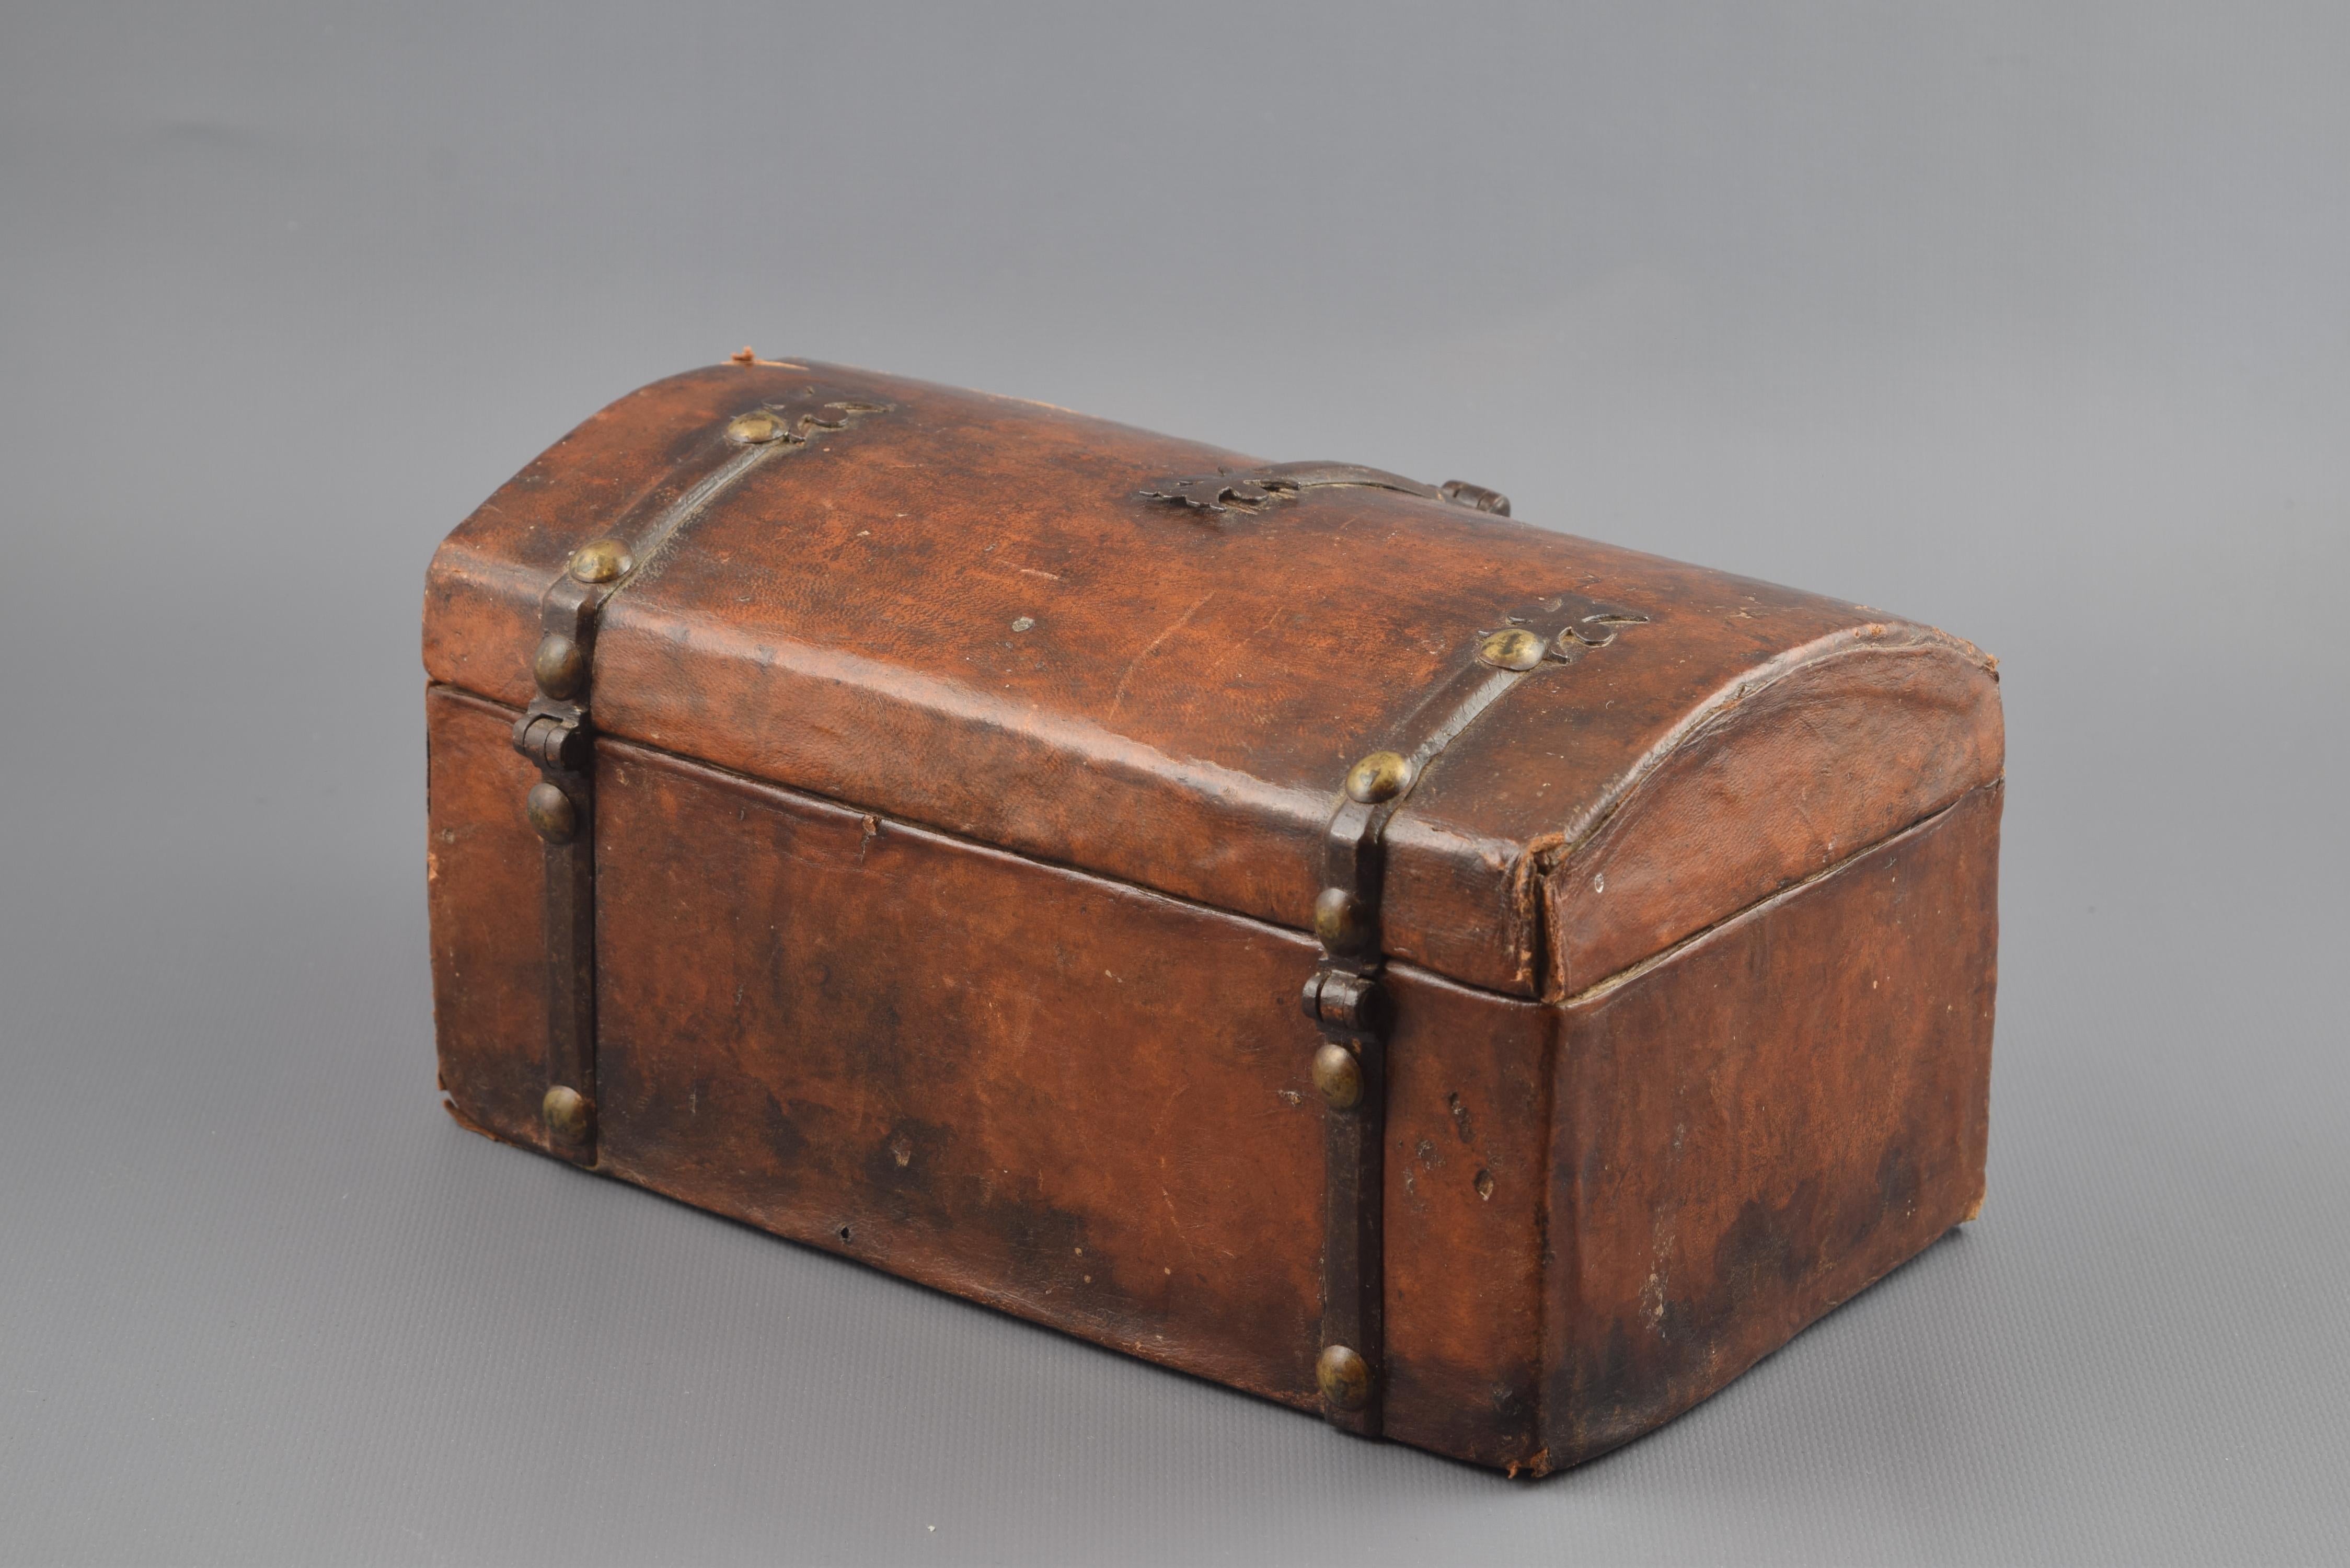 Wooden Chest, Leather and Metal, 17th Century (Spanisch)